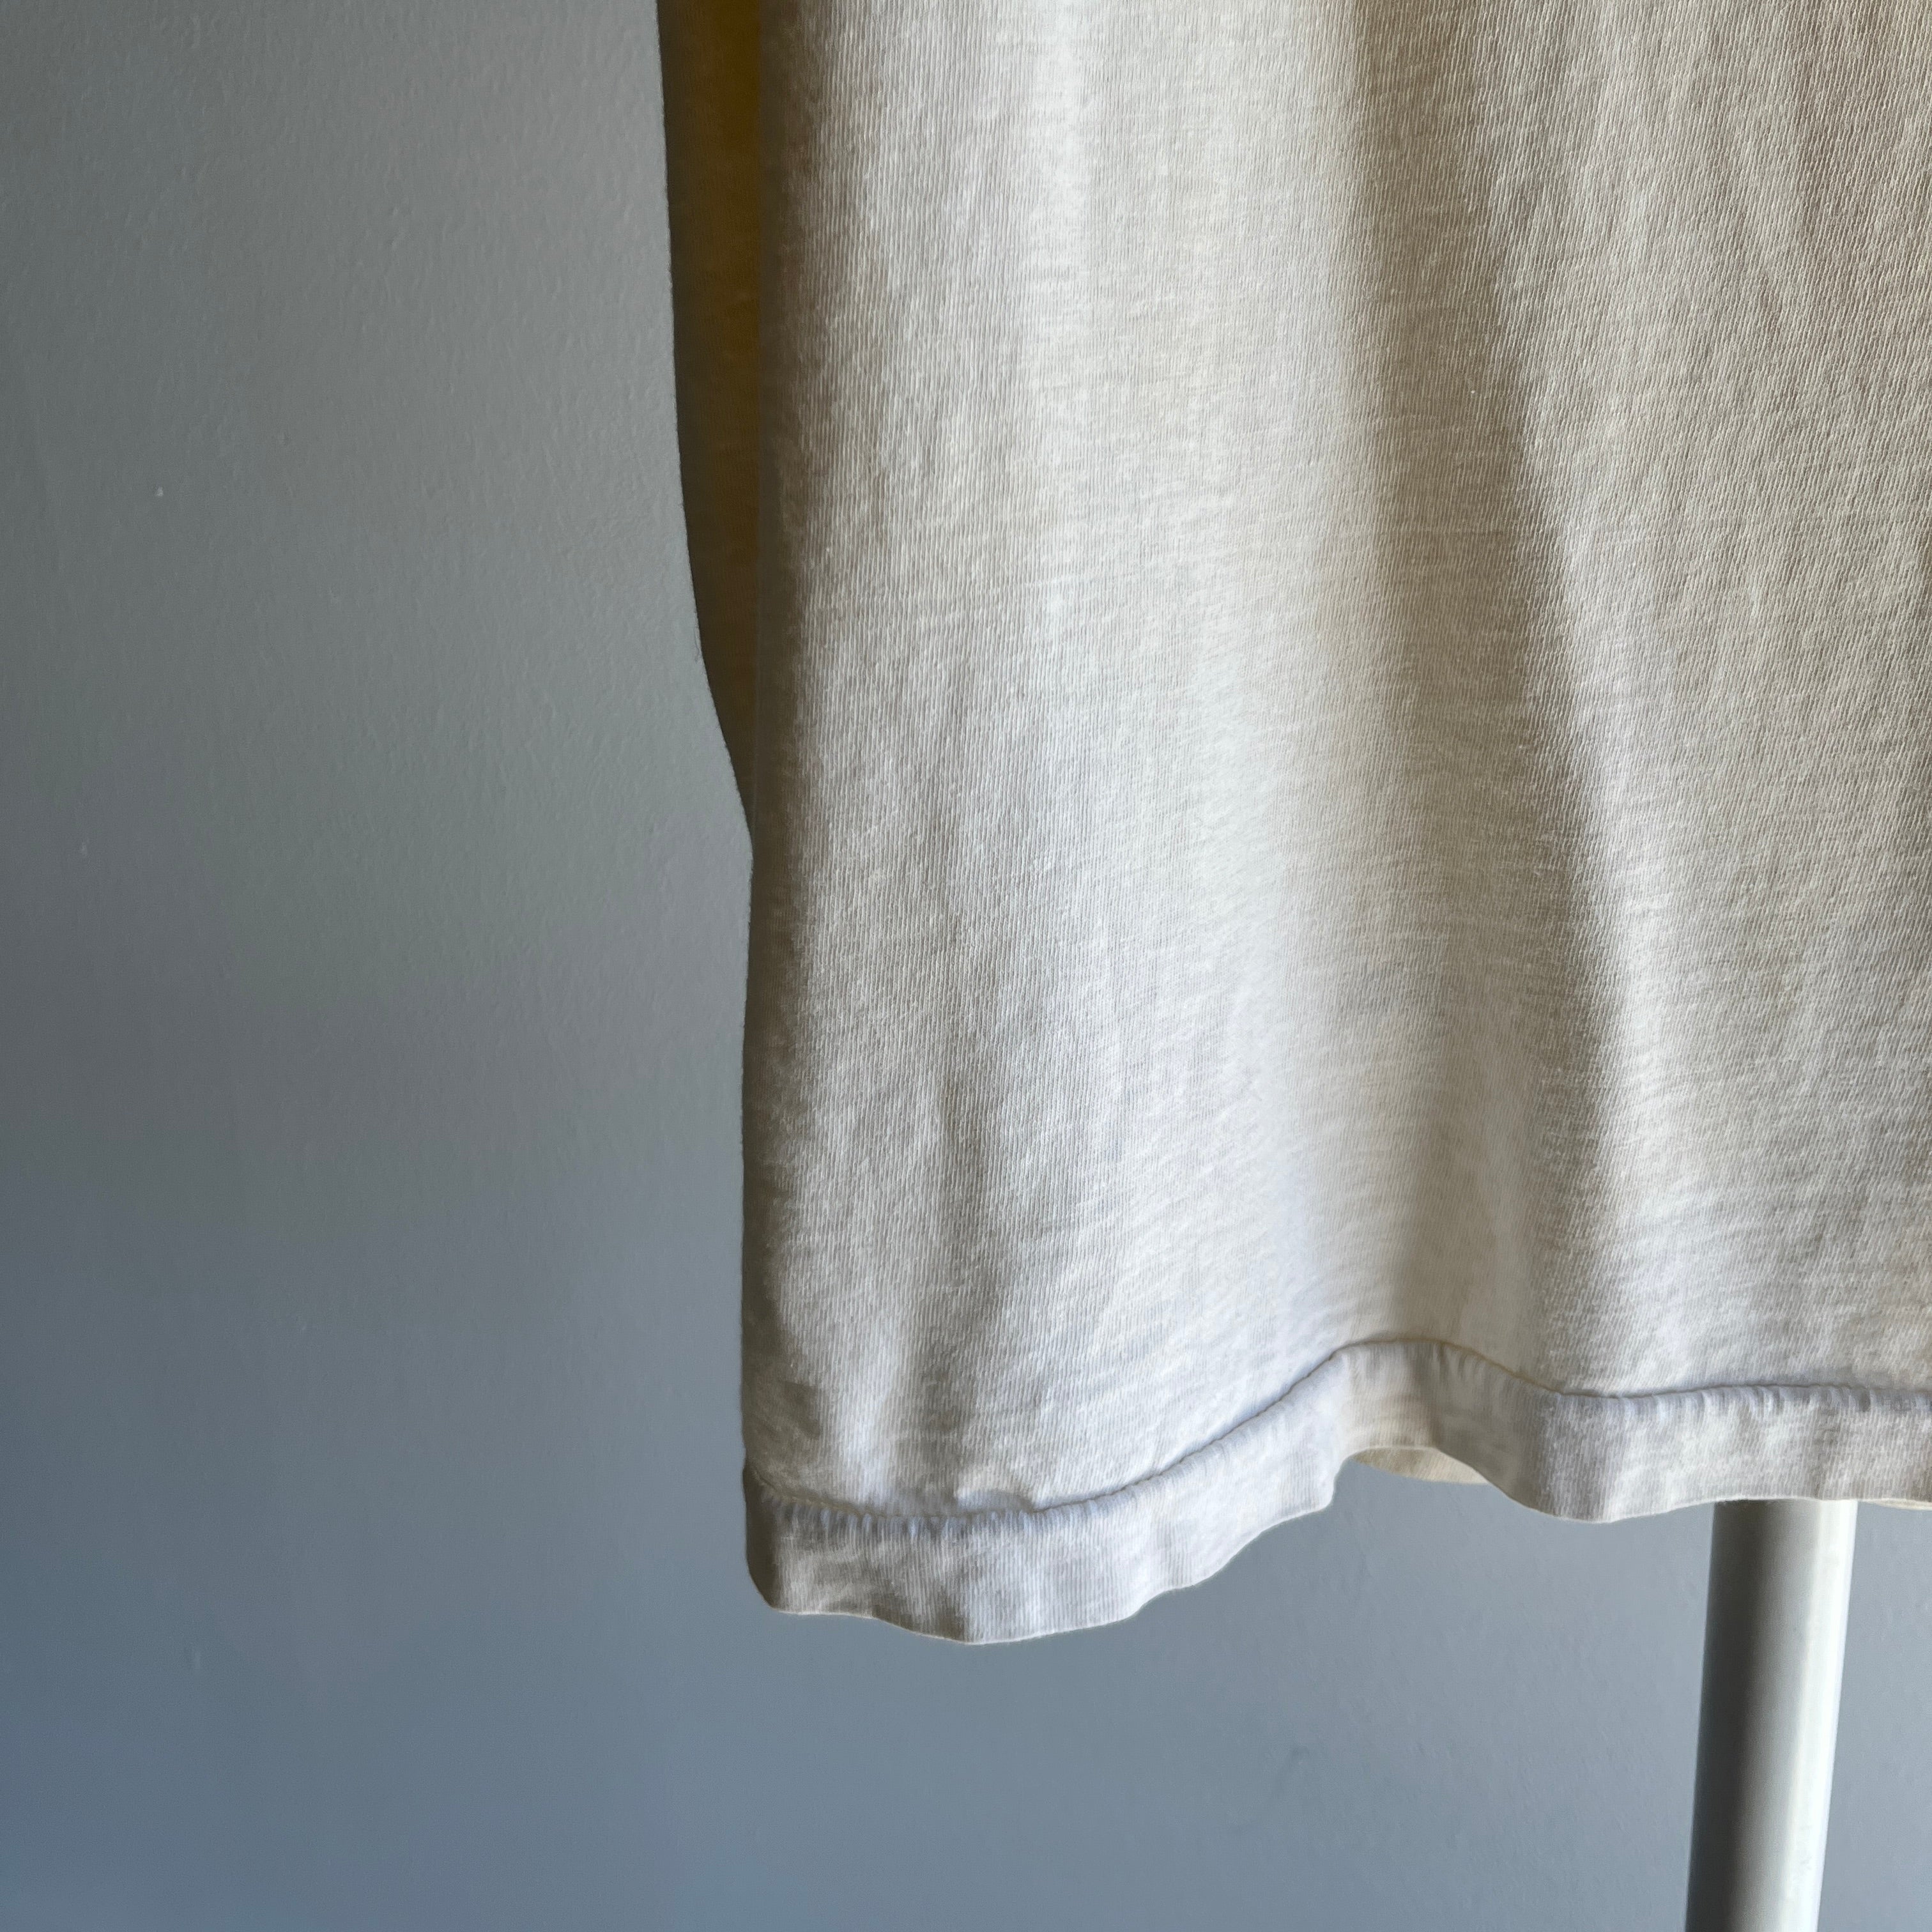 1990s Majorly Aged Stained Formerly White V-Neck Cotton T-Shirt by FOTL